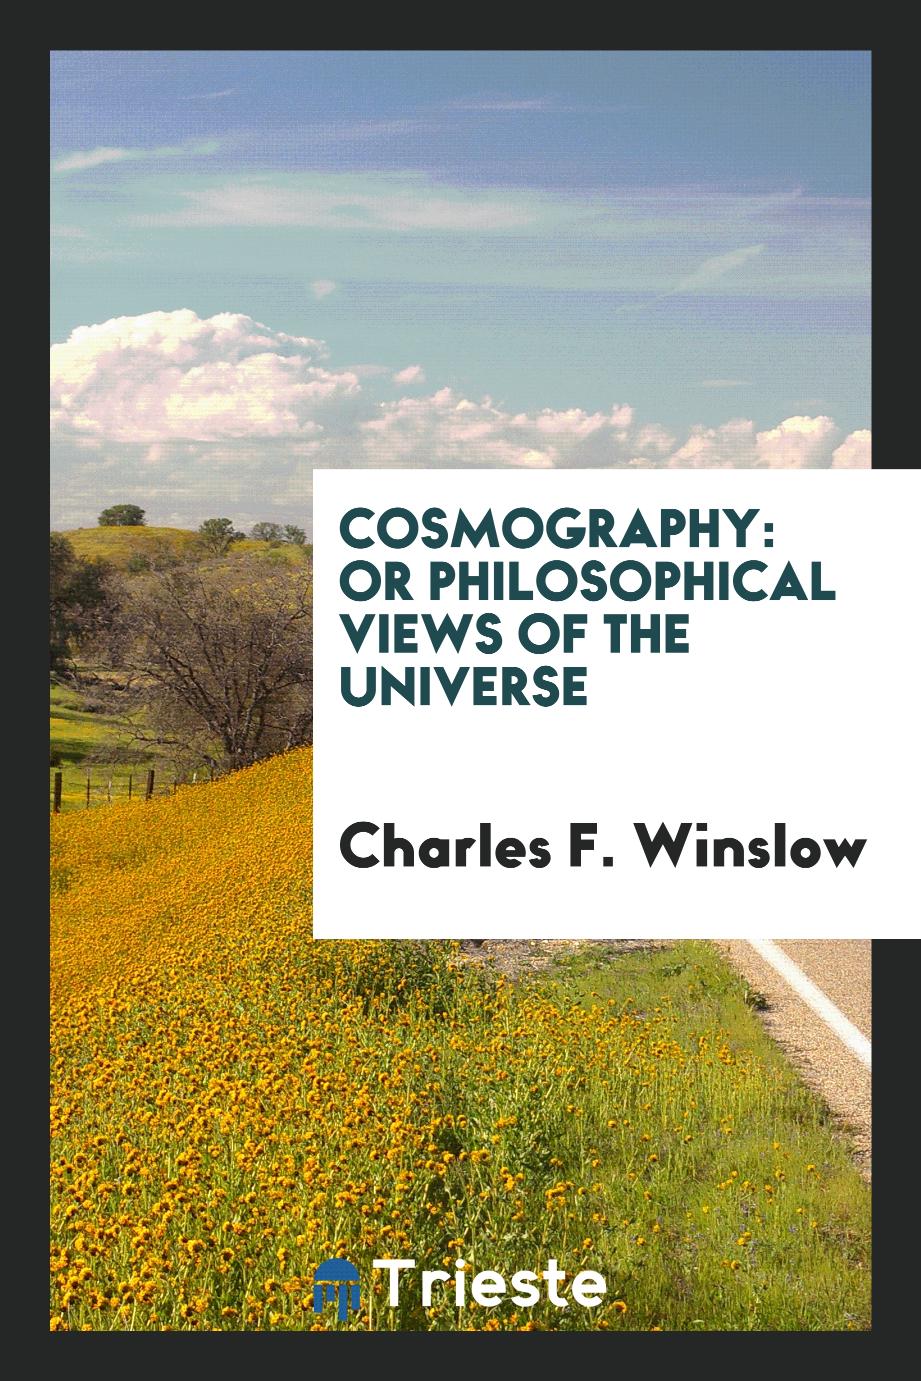 Cosmography: or philosophical views of the universe